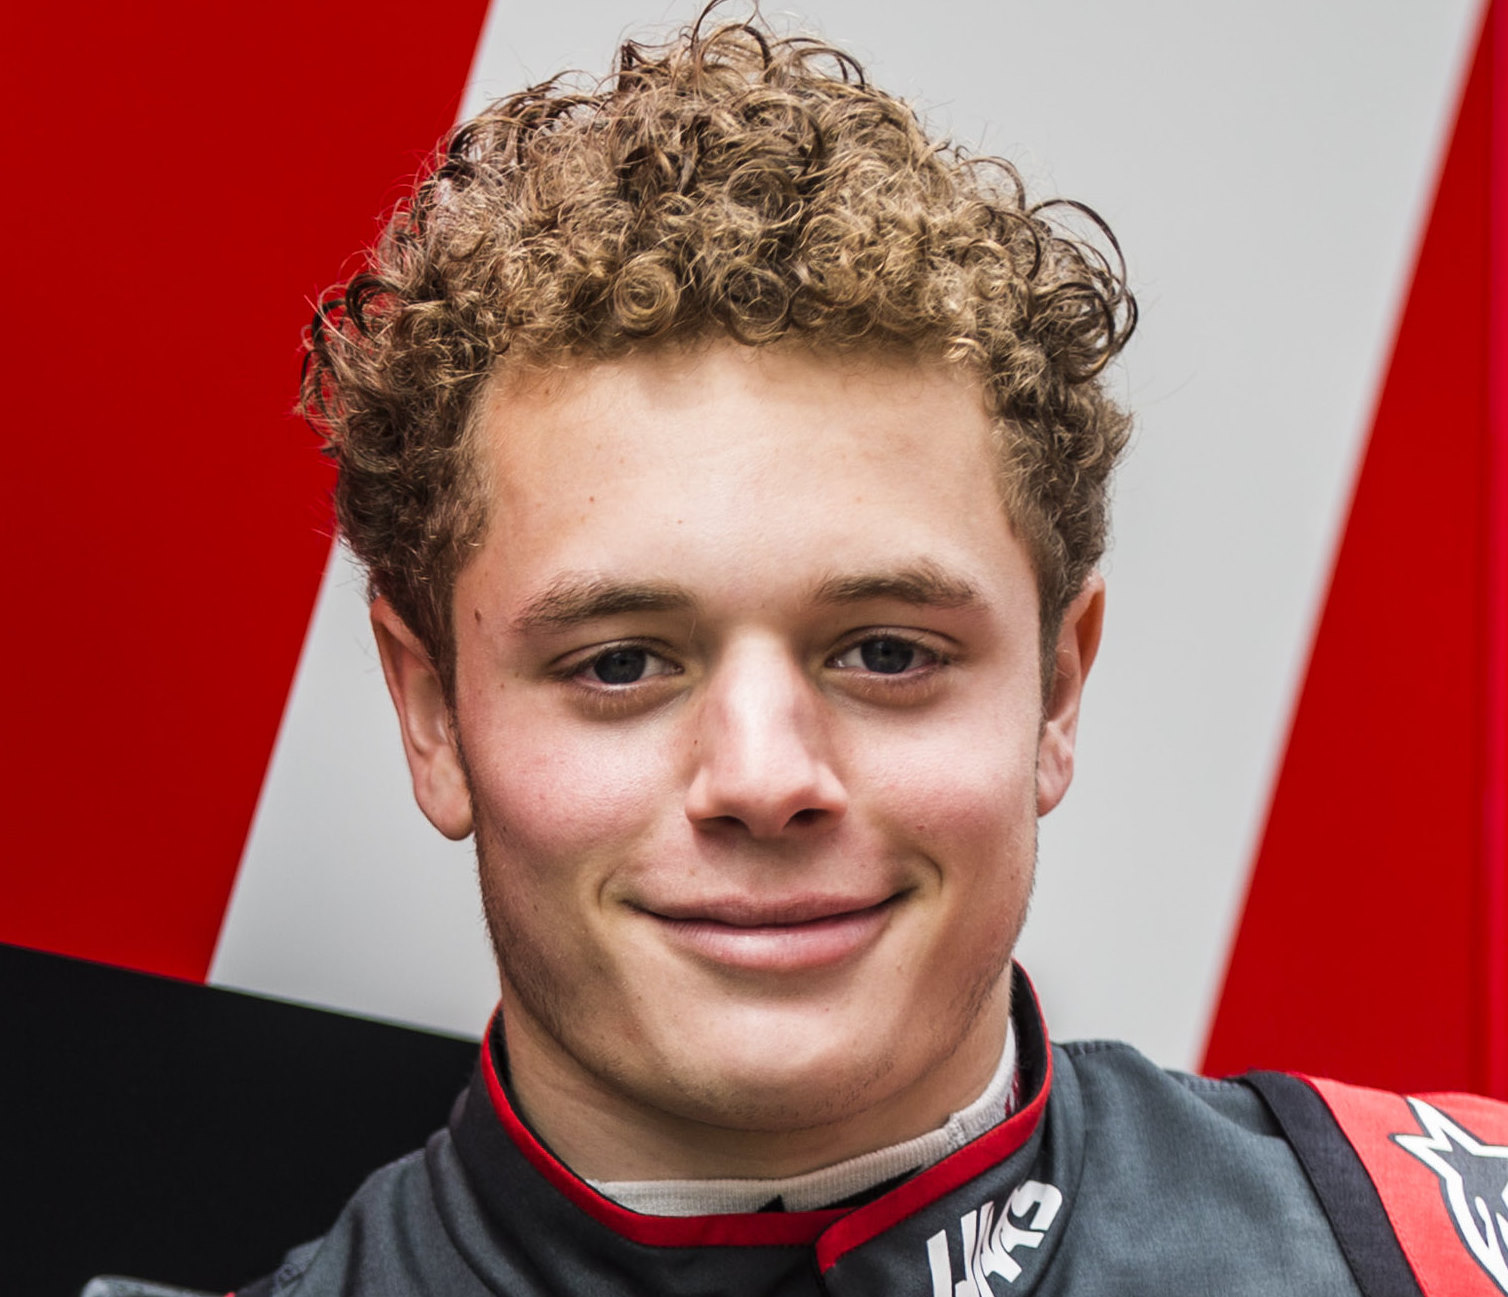 American Santino Ferrucci will never become a regular F1 driver with current Haas management in place